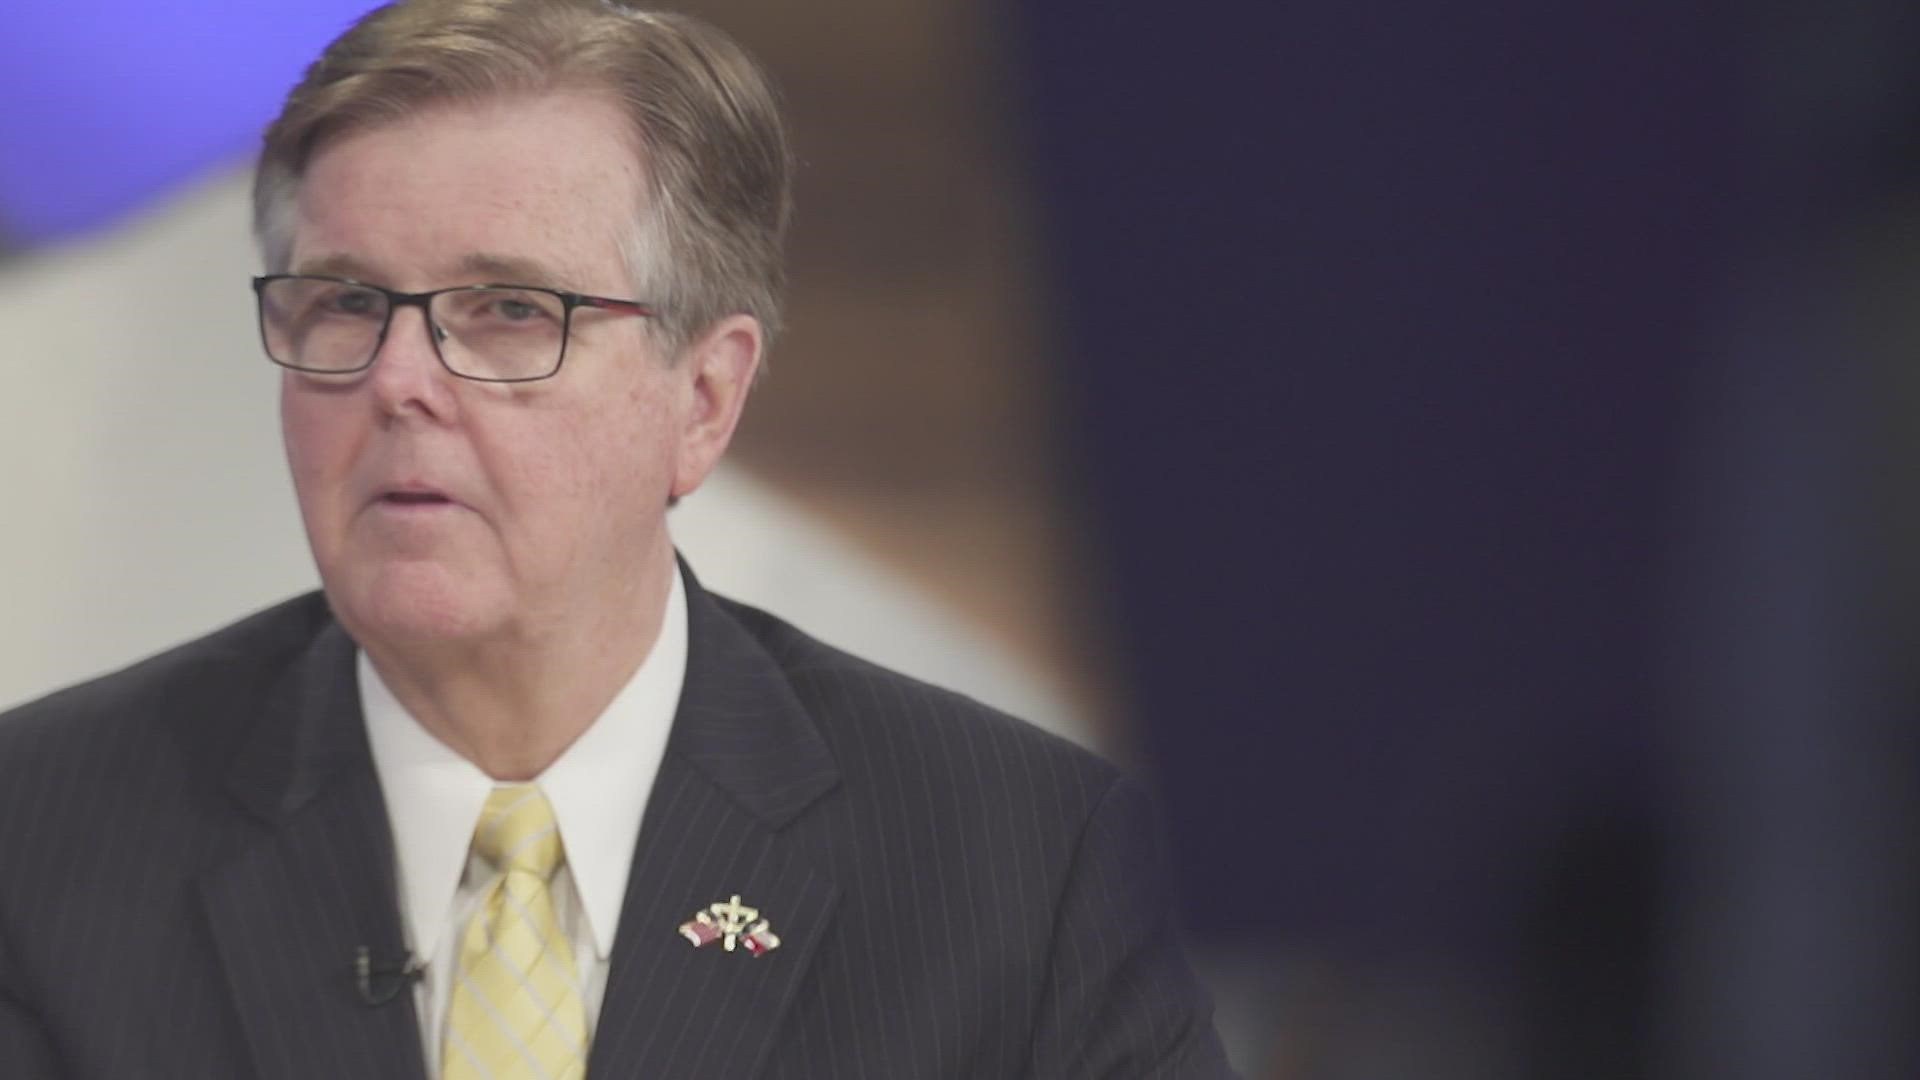 Lt. Gov. Dan Patrick claimed on Fox News that Black people are "the biggest group in most states" still not vaccinated.